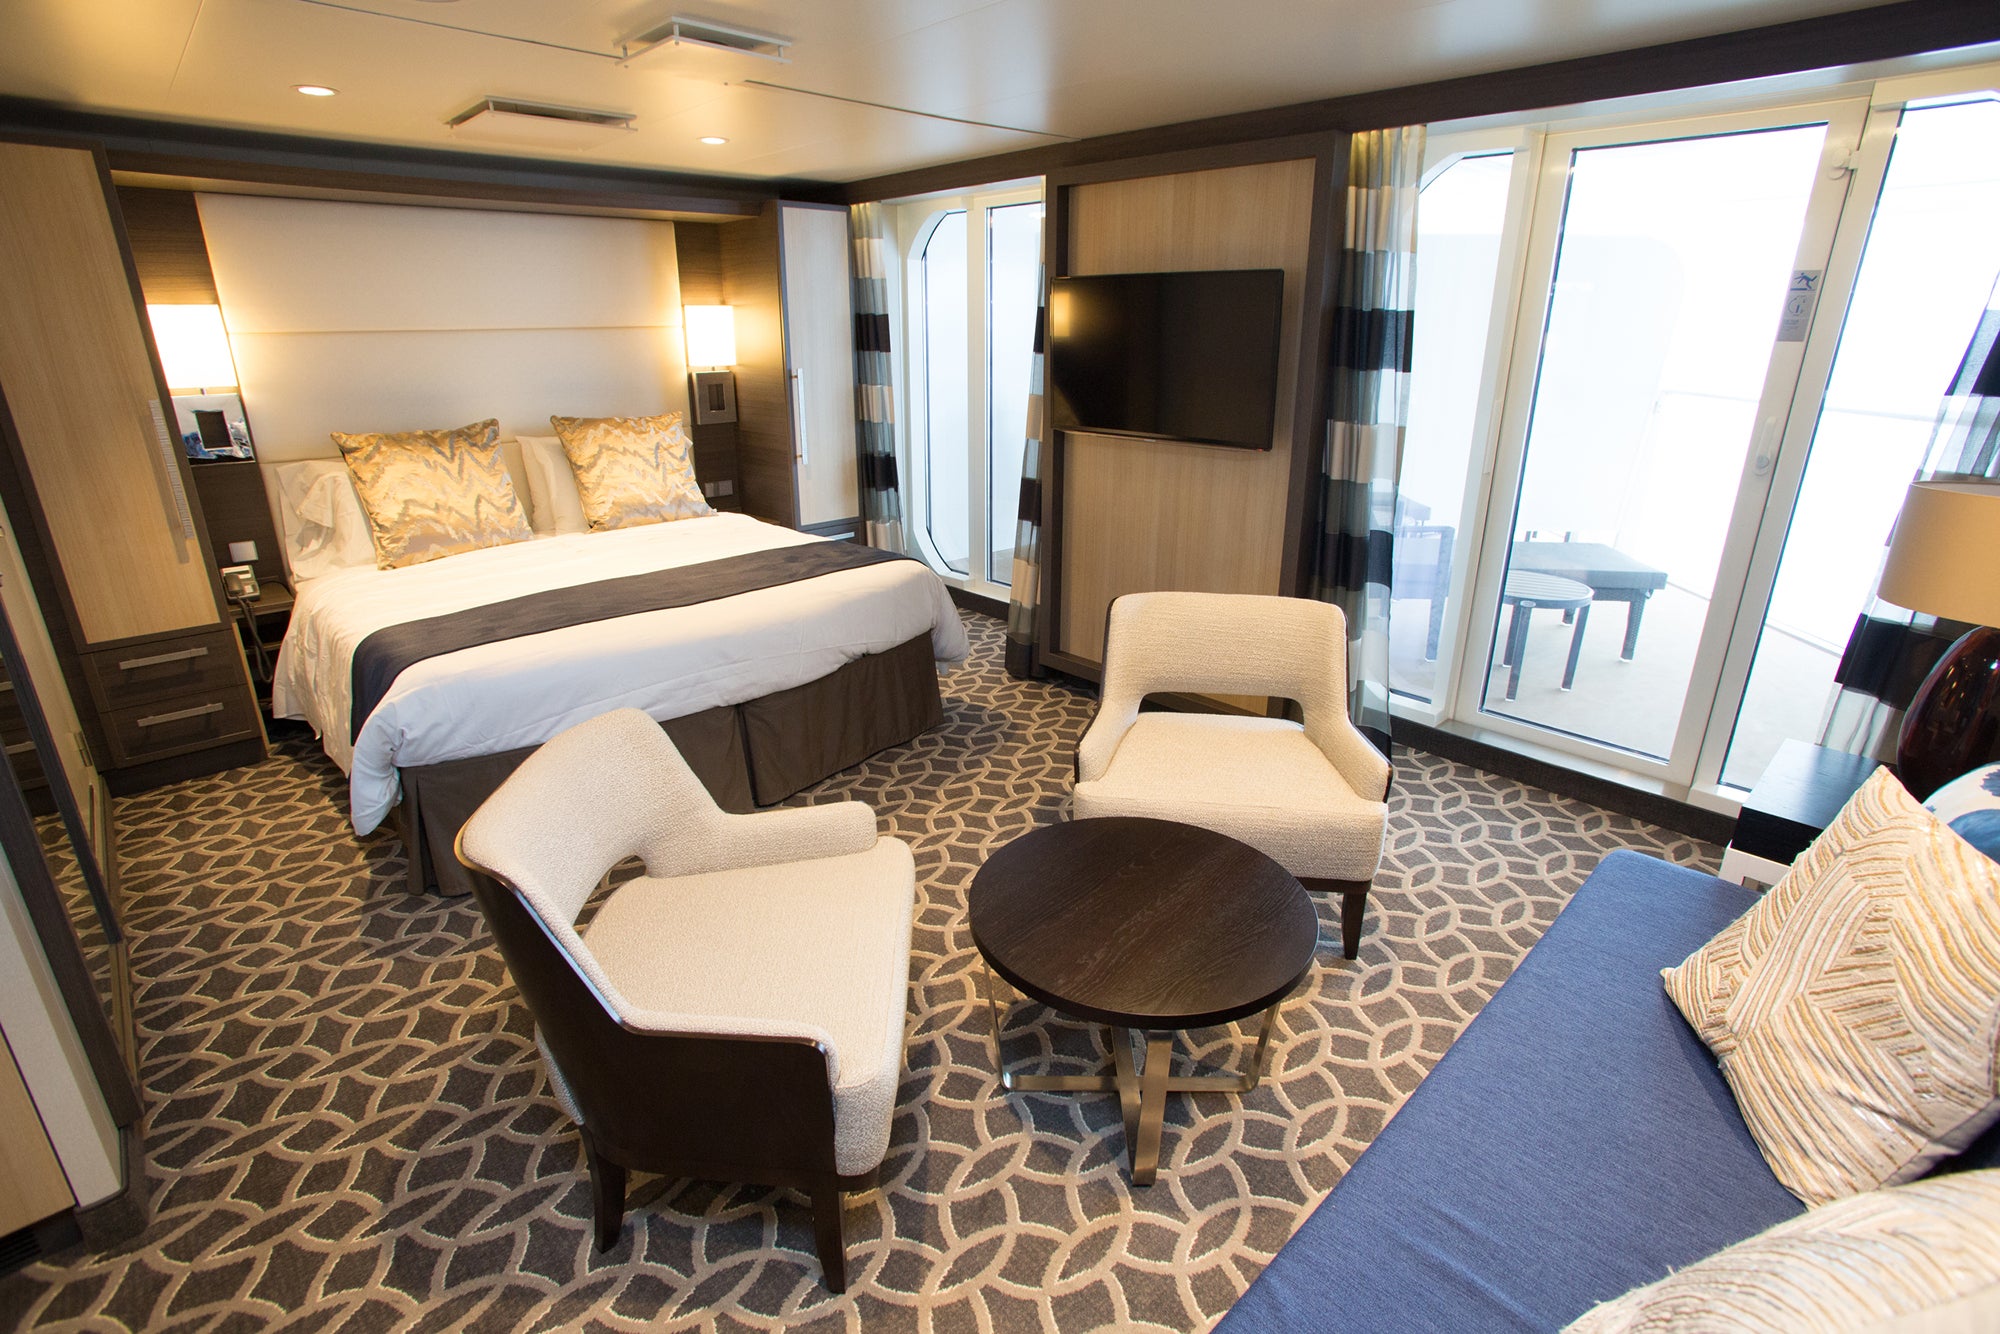 Royal Caribbean Quantum of the Seas Grand Loft Suite with Balcony